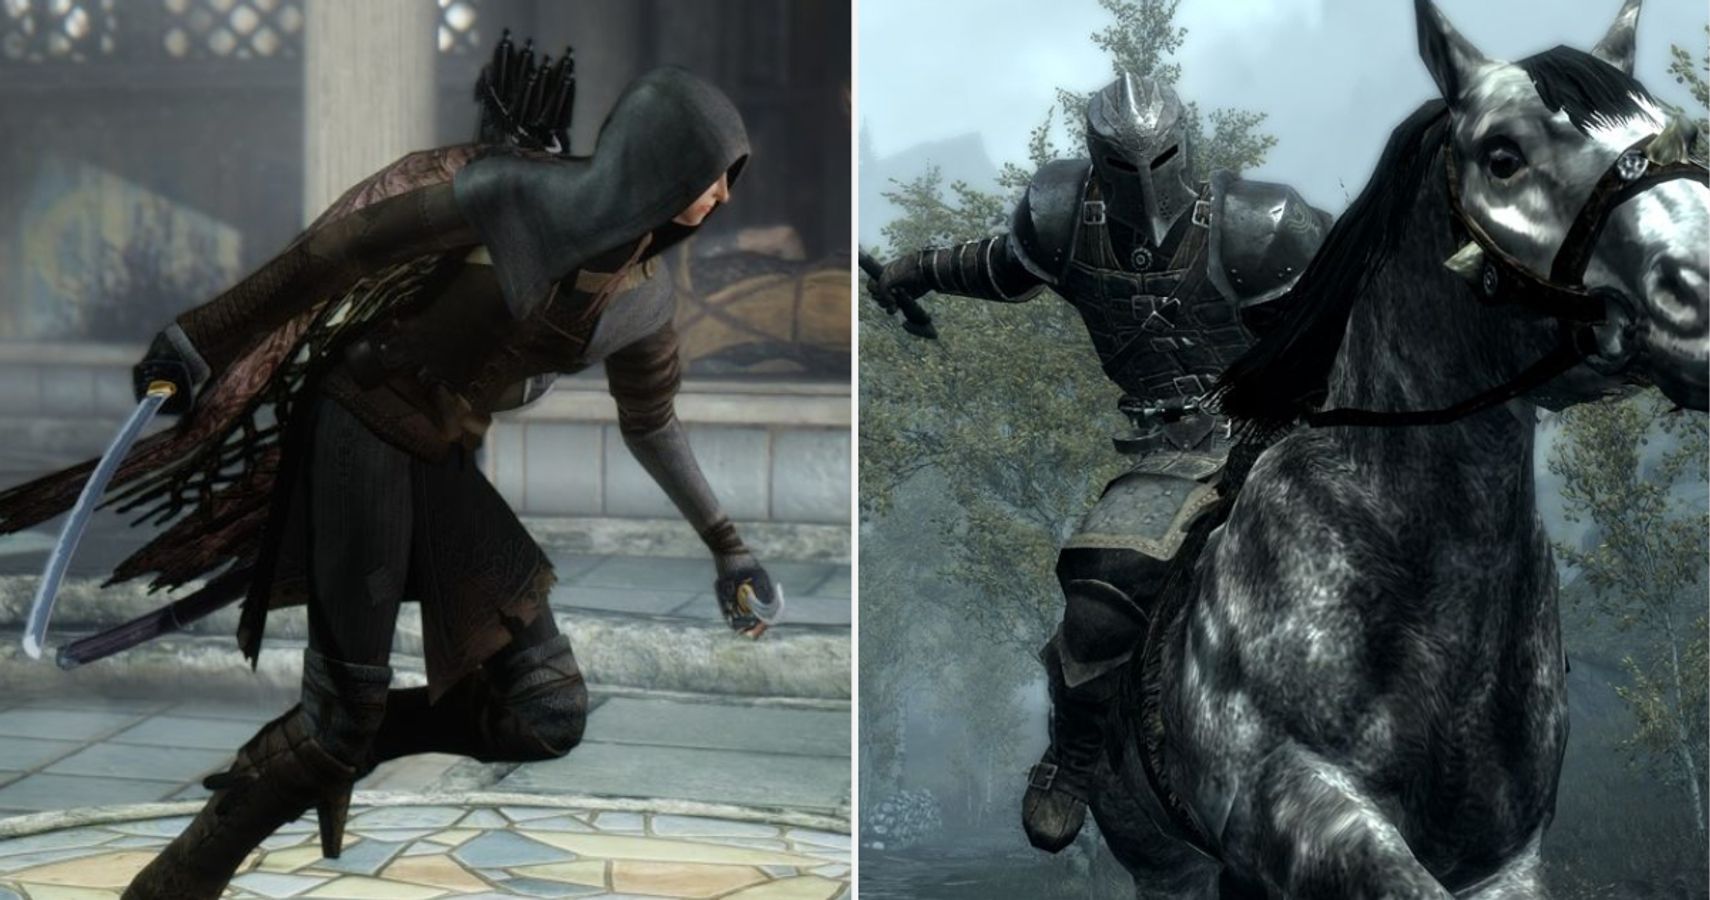 Skyrim Stealthy character and warrior on horse